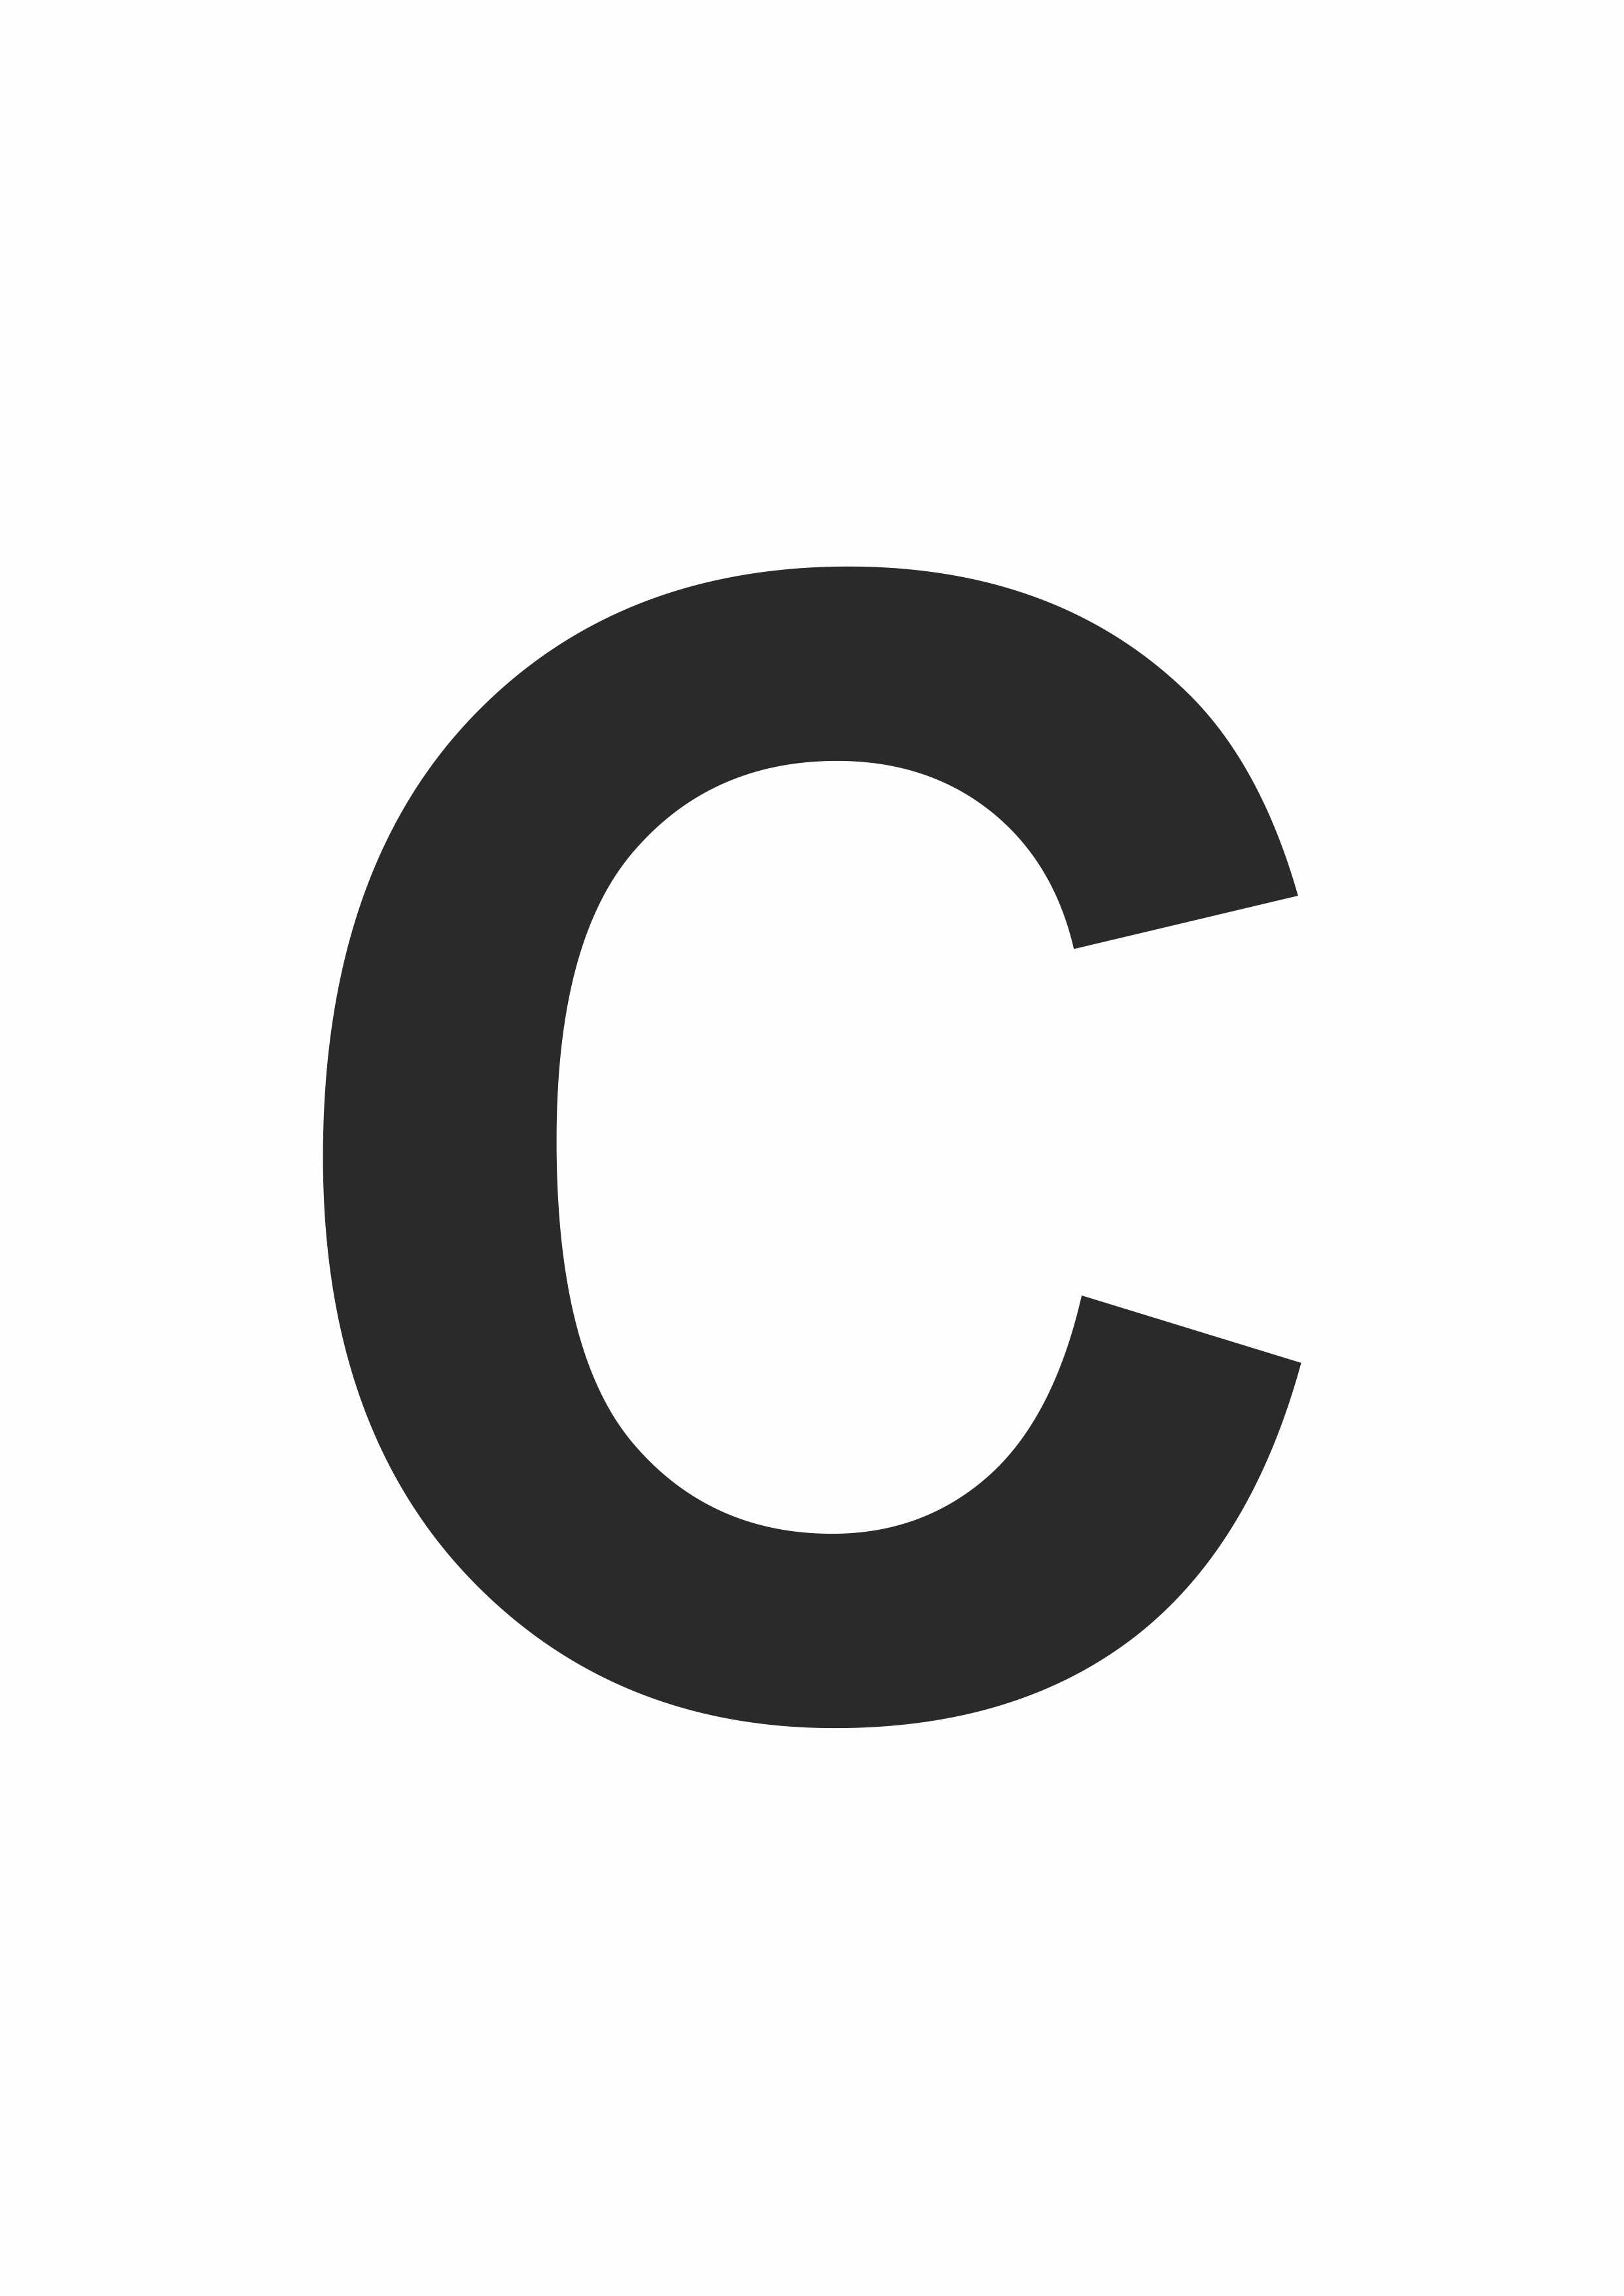 Large Printable Letter C – Free Printables Throughout Large Letter C Template